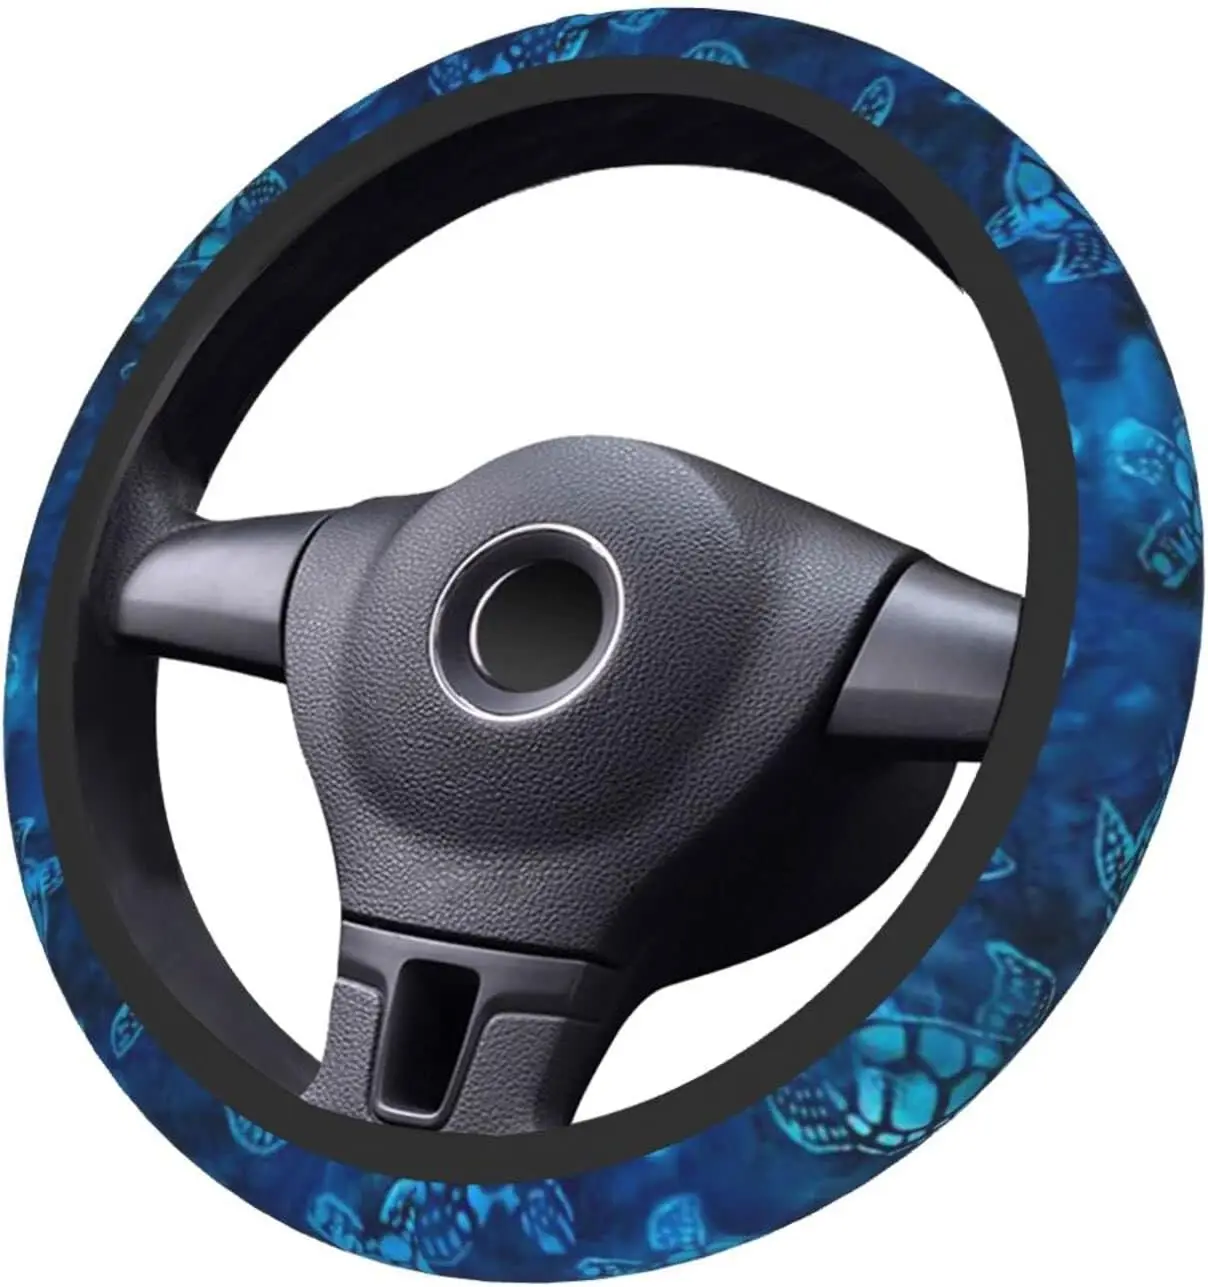 

Sea Turtle Blue Cars Steering Wheel Cover for Women Men Girls Durable Elasticity Auto Accessories Interior Protector Universal